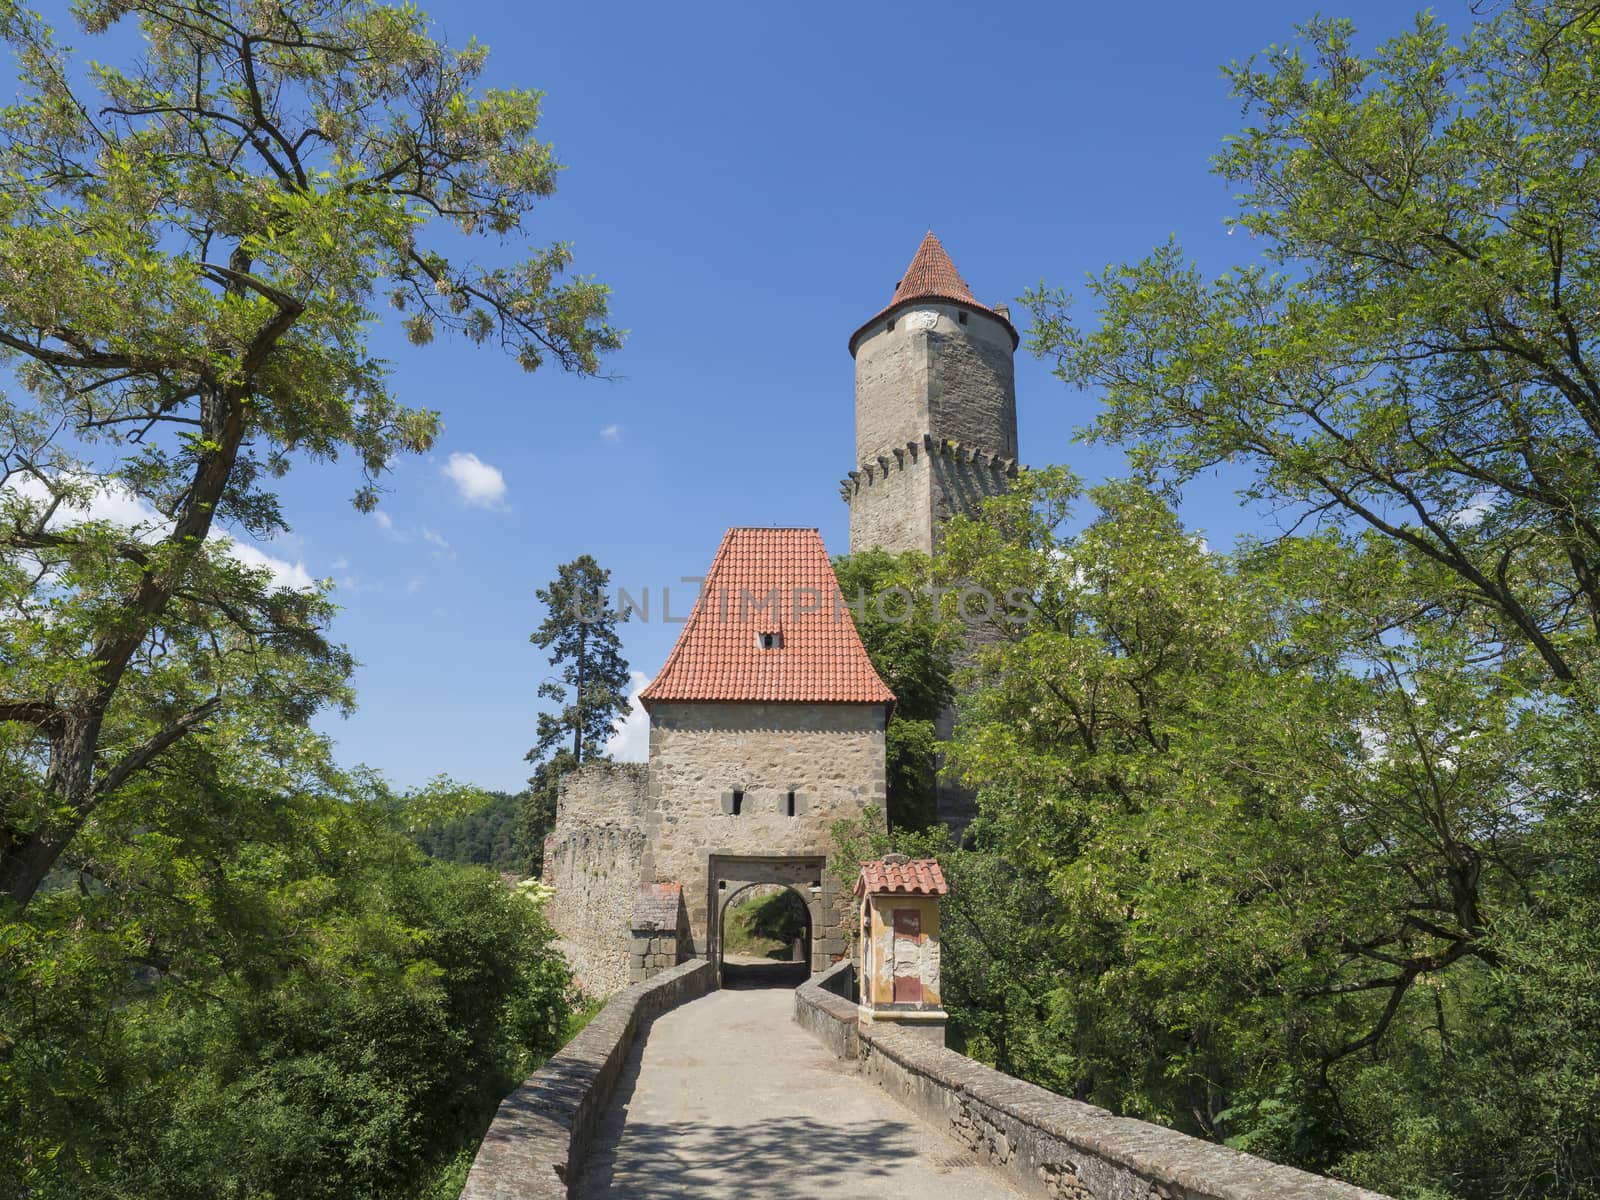 medieval castle Zvikov (Klingenberg) main entry gate with round tower and stone bridge, green trees and blue sky, castle is placed at confluence of the Vltava and Otava rivers, South Bohemian Region, Czech Republic, vertical view